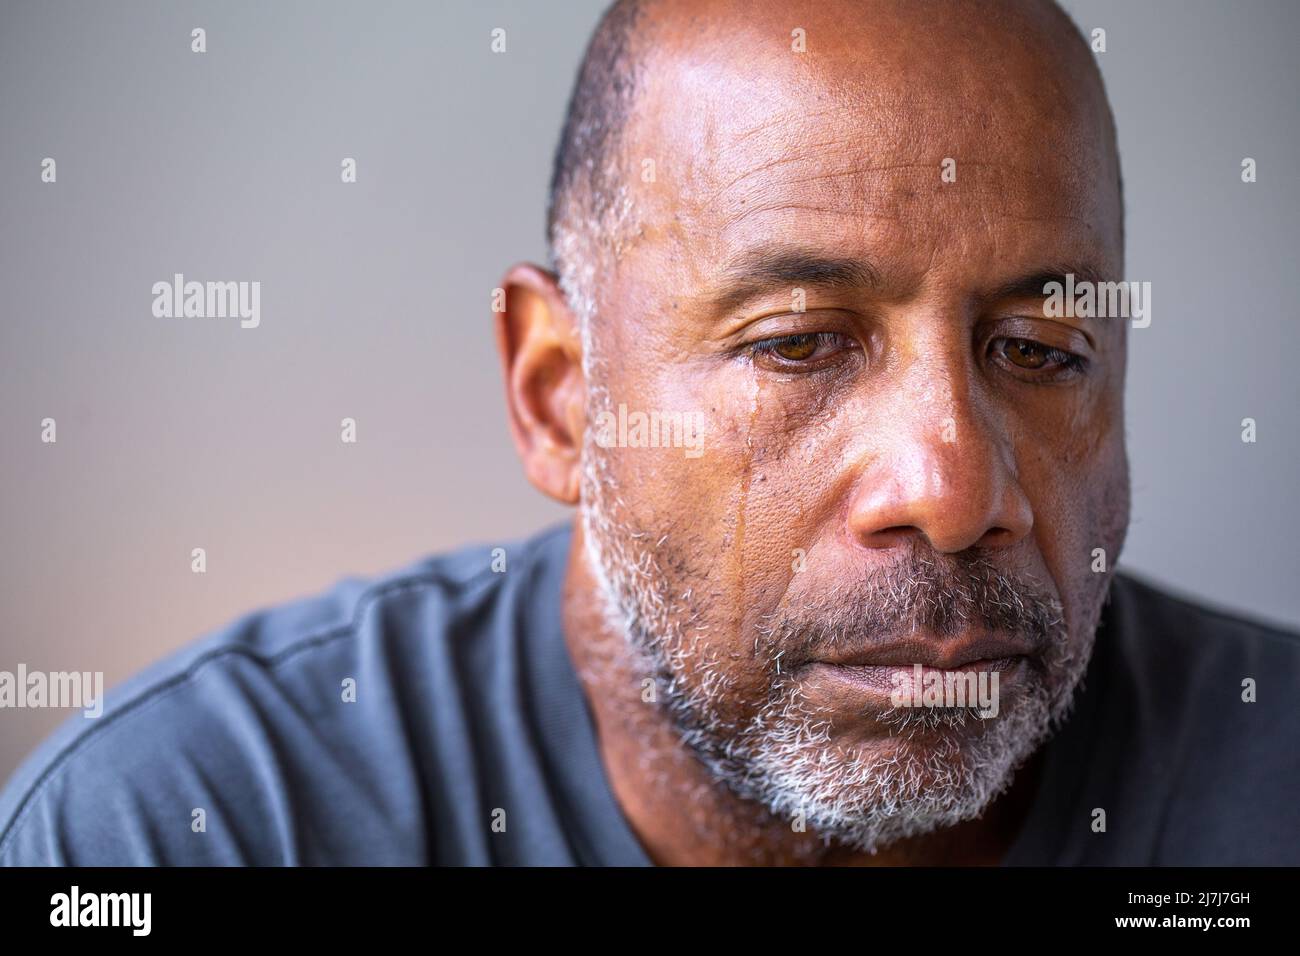 Portrait of a mature man looking sad with tears in his eyes. Stock Photo